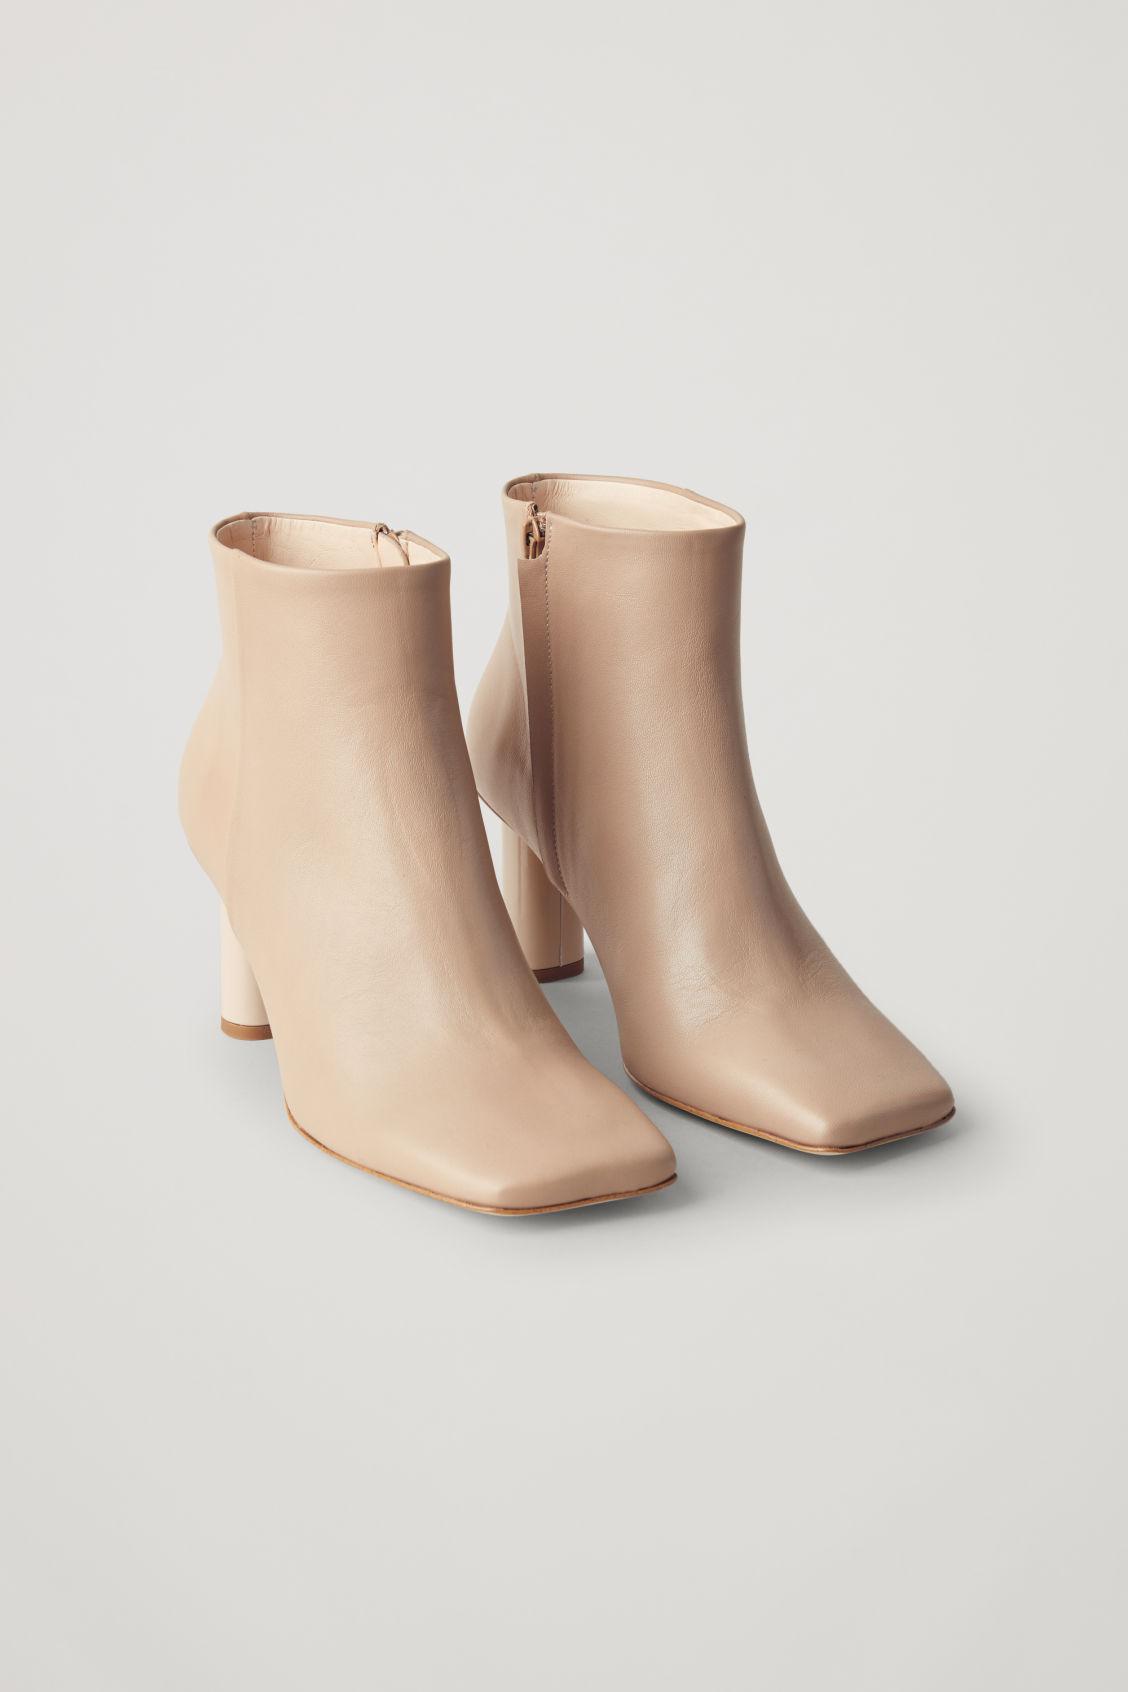 Burma lide Andragende COS Square Toe Leather Ankle Boots in Natural | Lyst